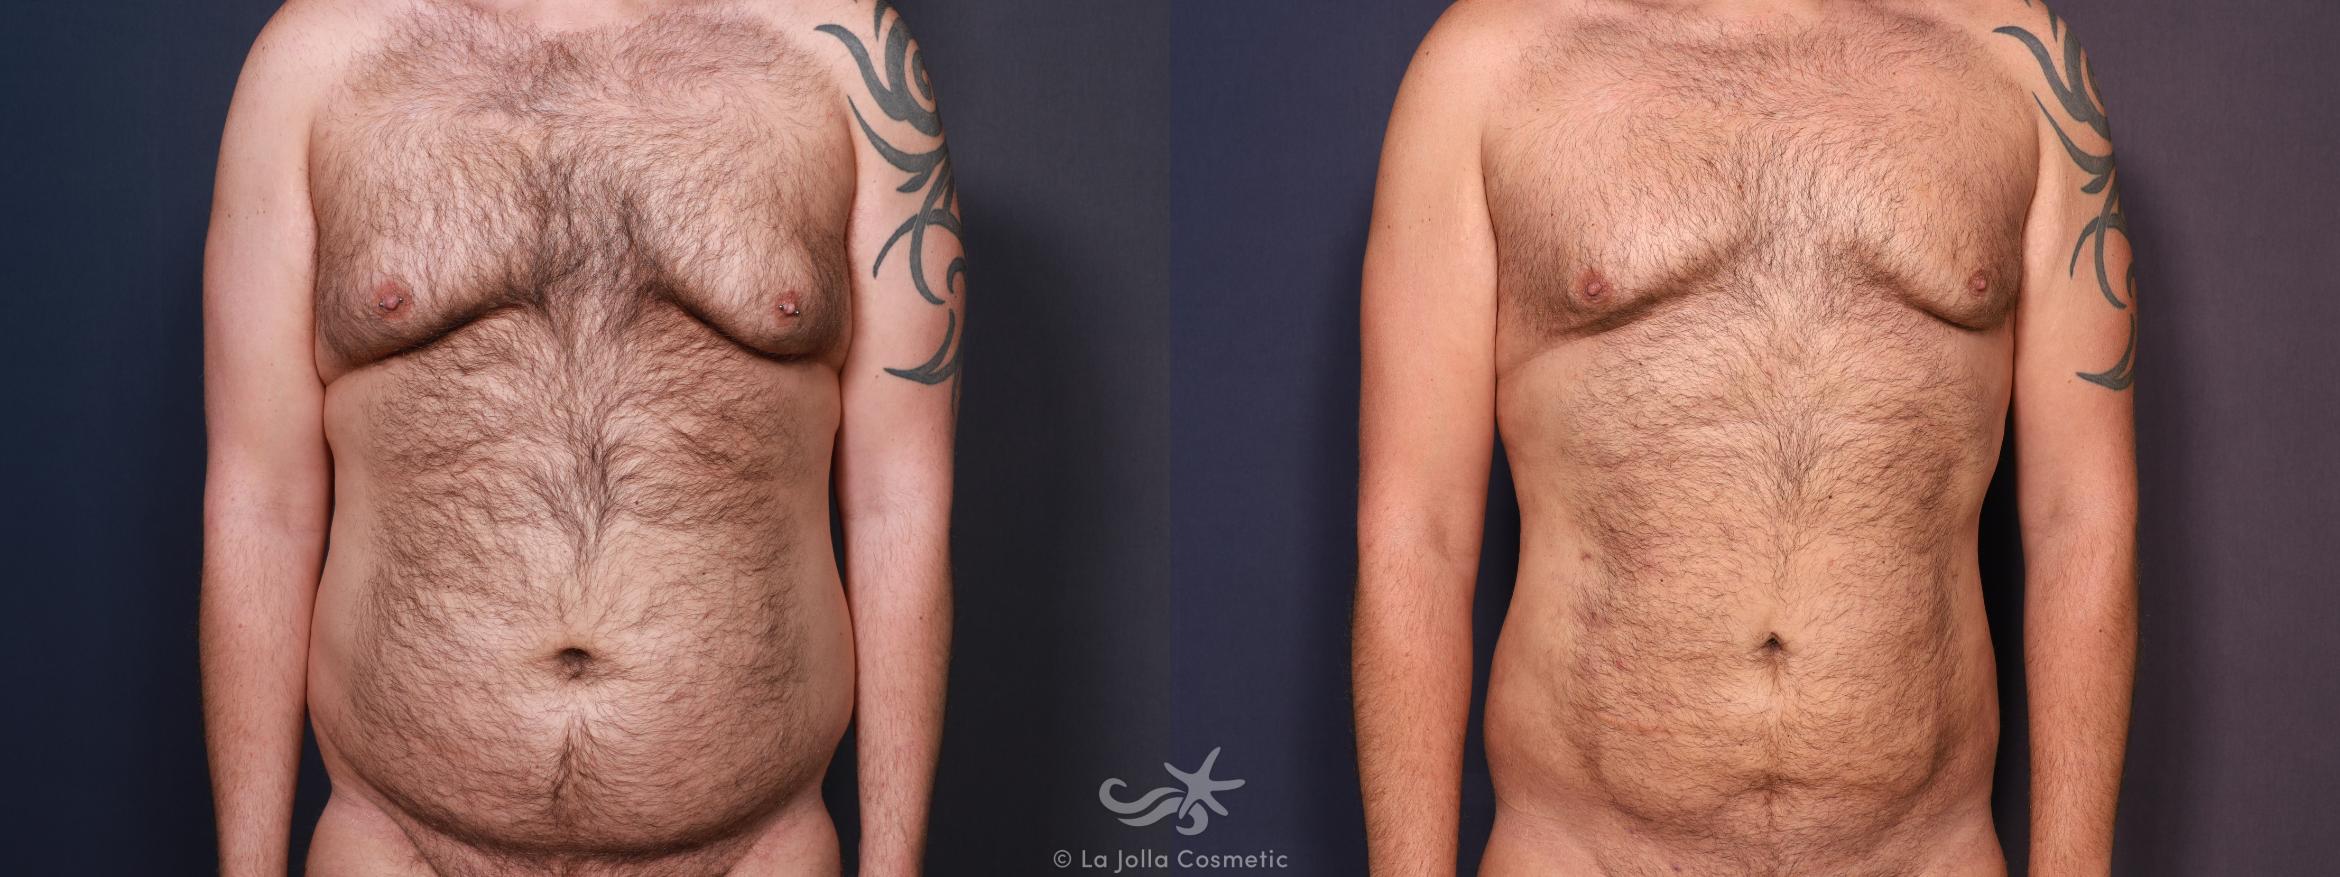 Before & After Male Liposuction Result 672 Front View in San Diego, CA